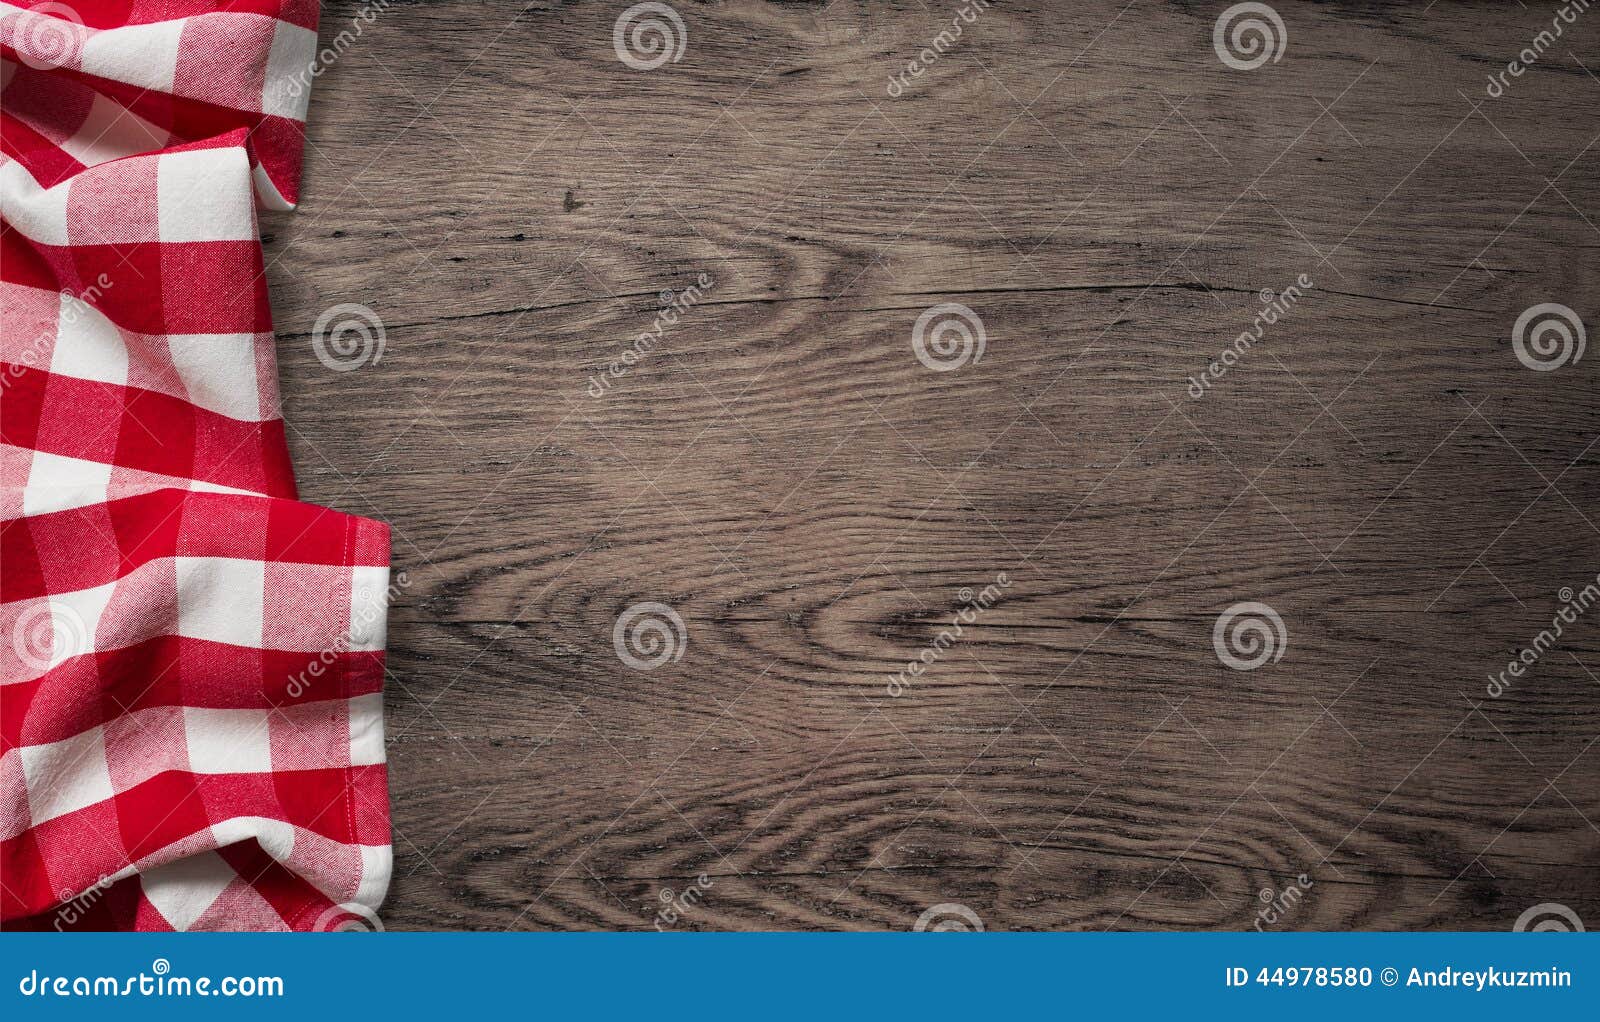 Picnic Tablecloth On Old Wooden Table Top View Stock Photo ...